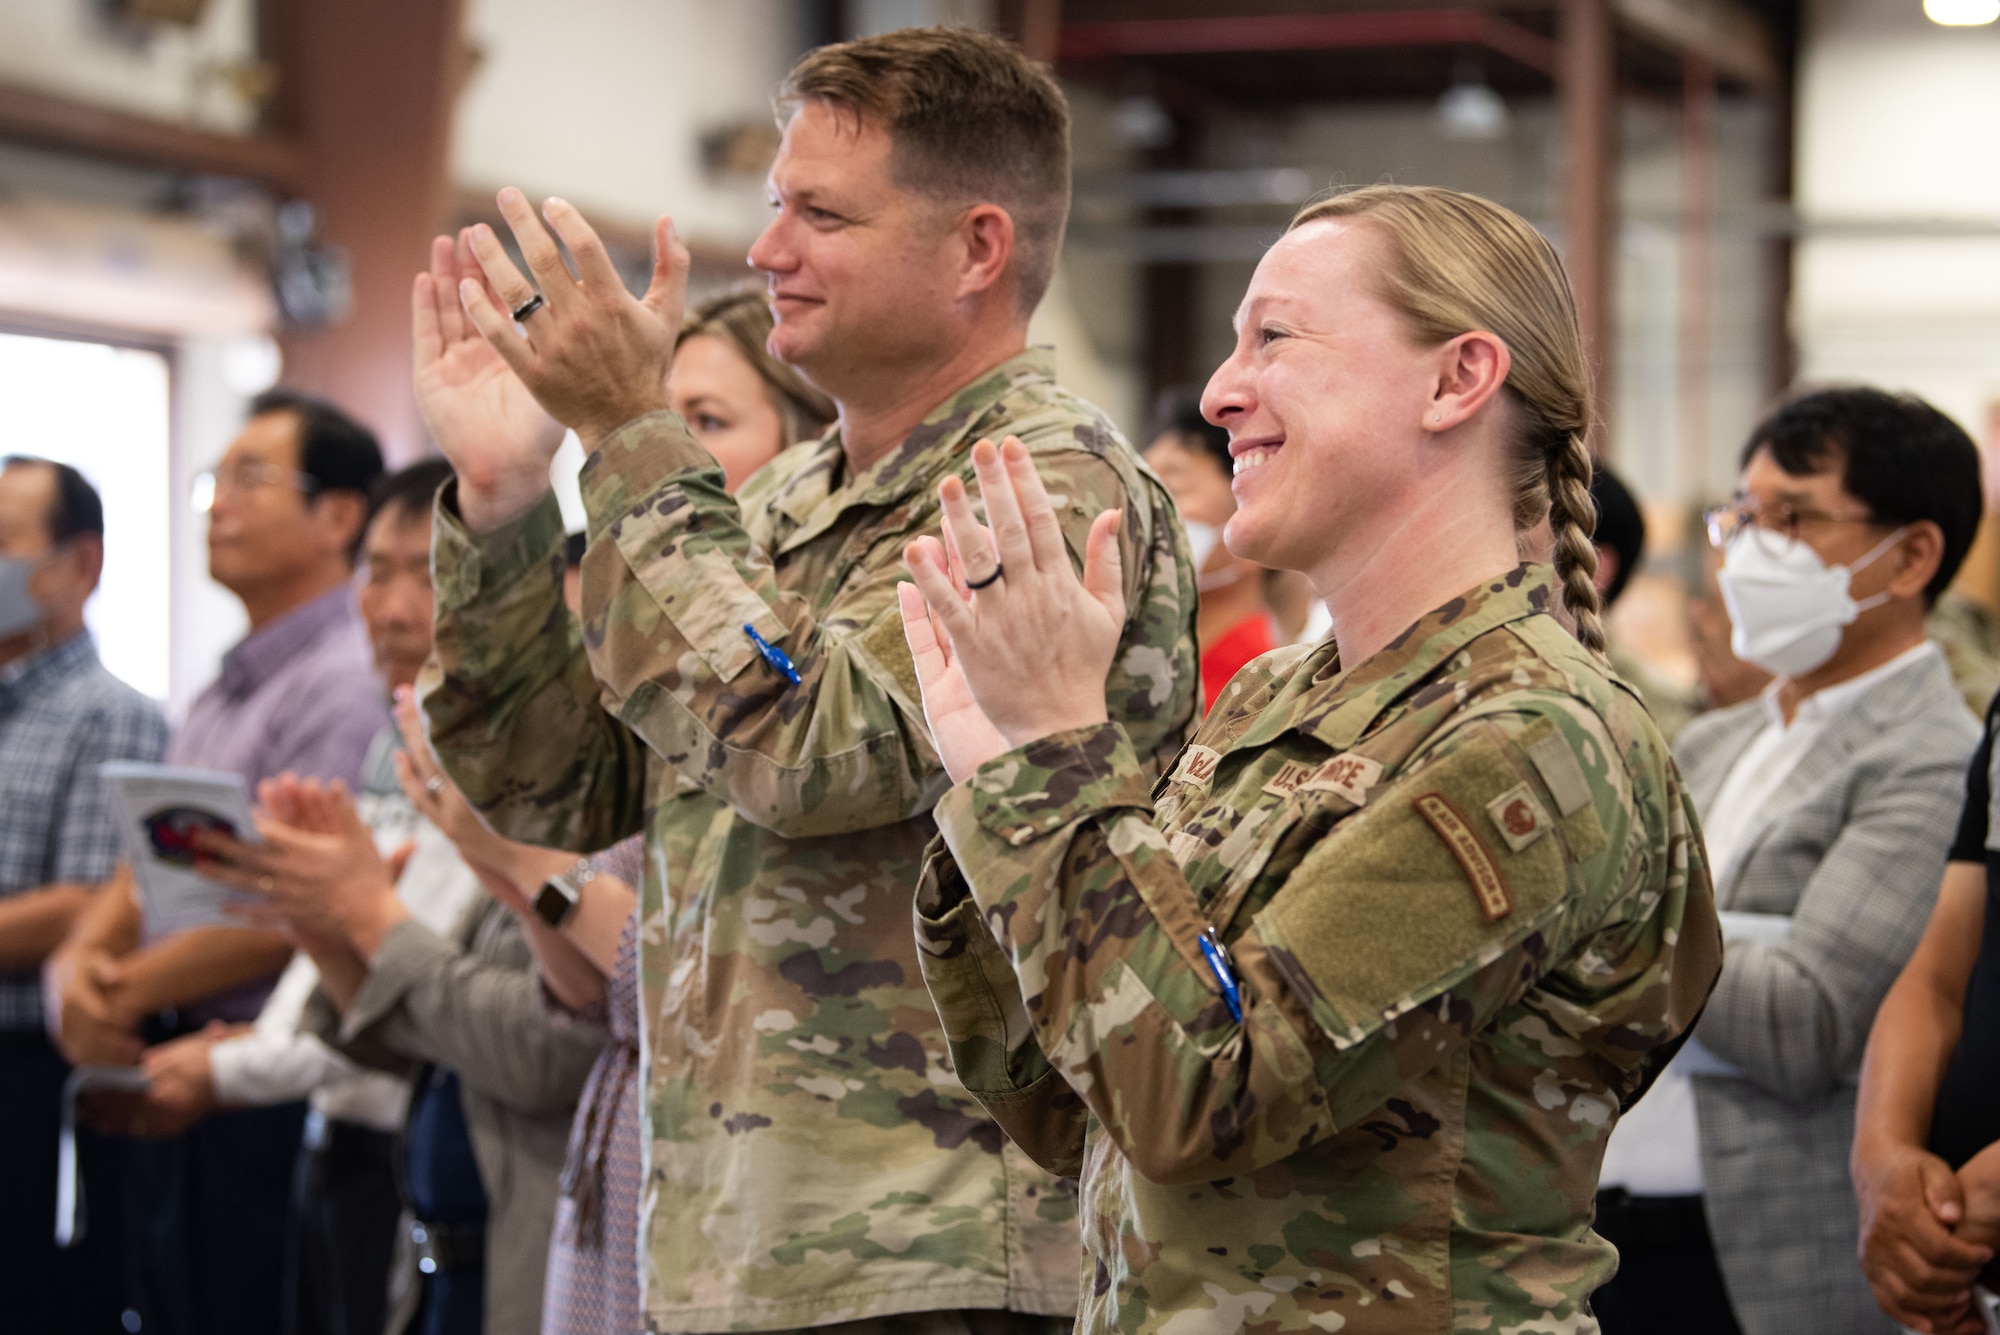 Members of the audience applaud Maj. Vincent McLean, 51st Logistics Readiness Squadron’s newly appointed commander, during the squadron’s assumption of command ceremony at Osan Air Base, Republic of Korea, July 22, 2022.